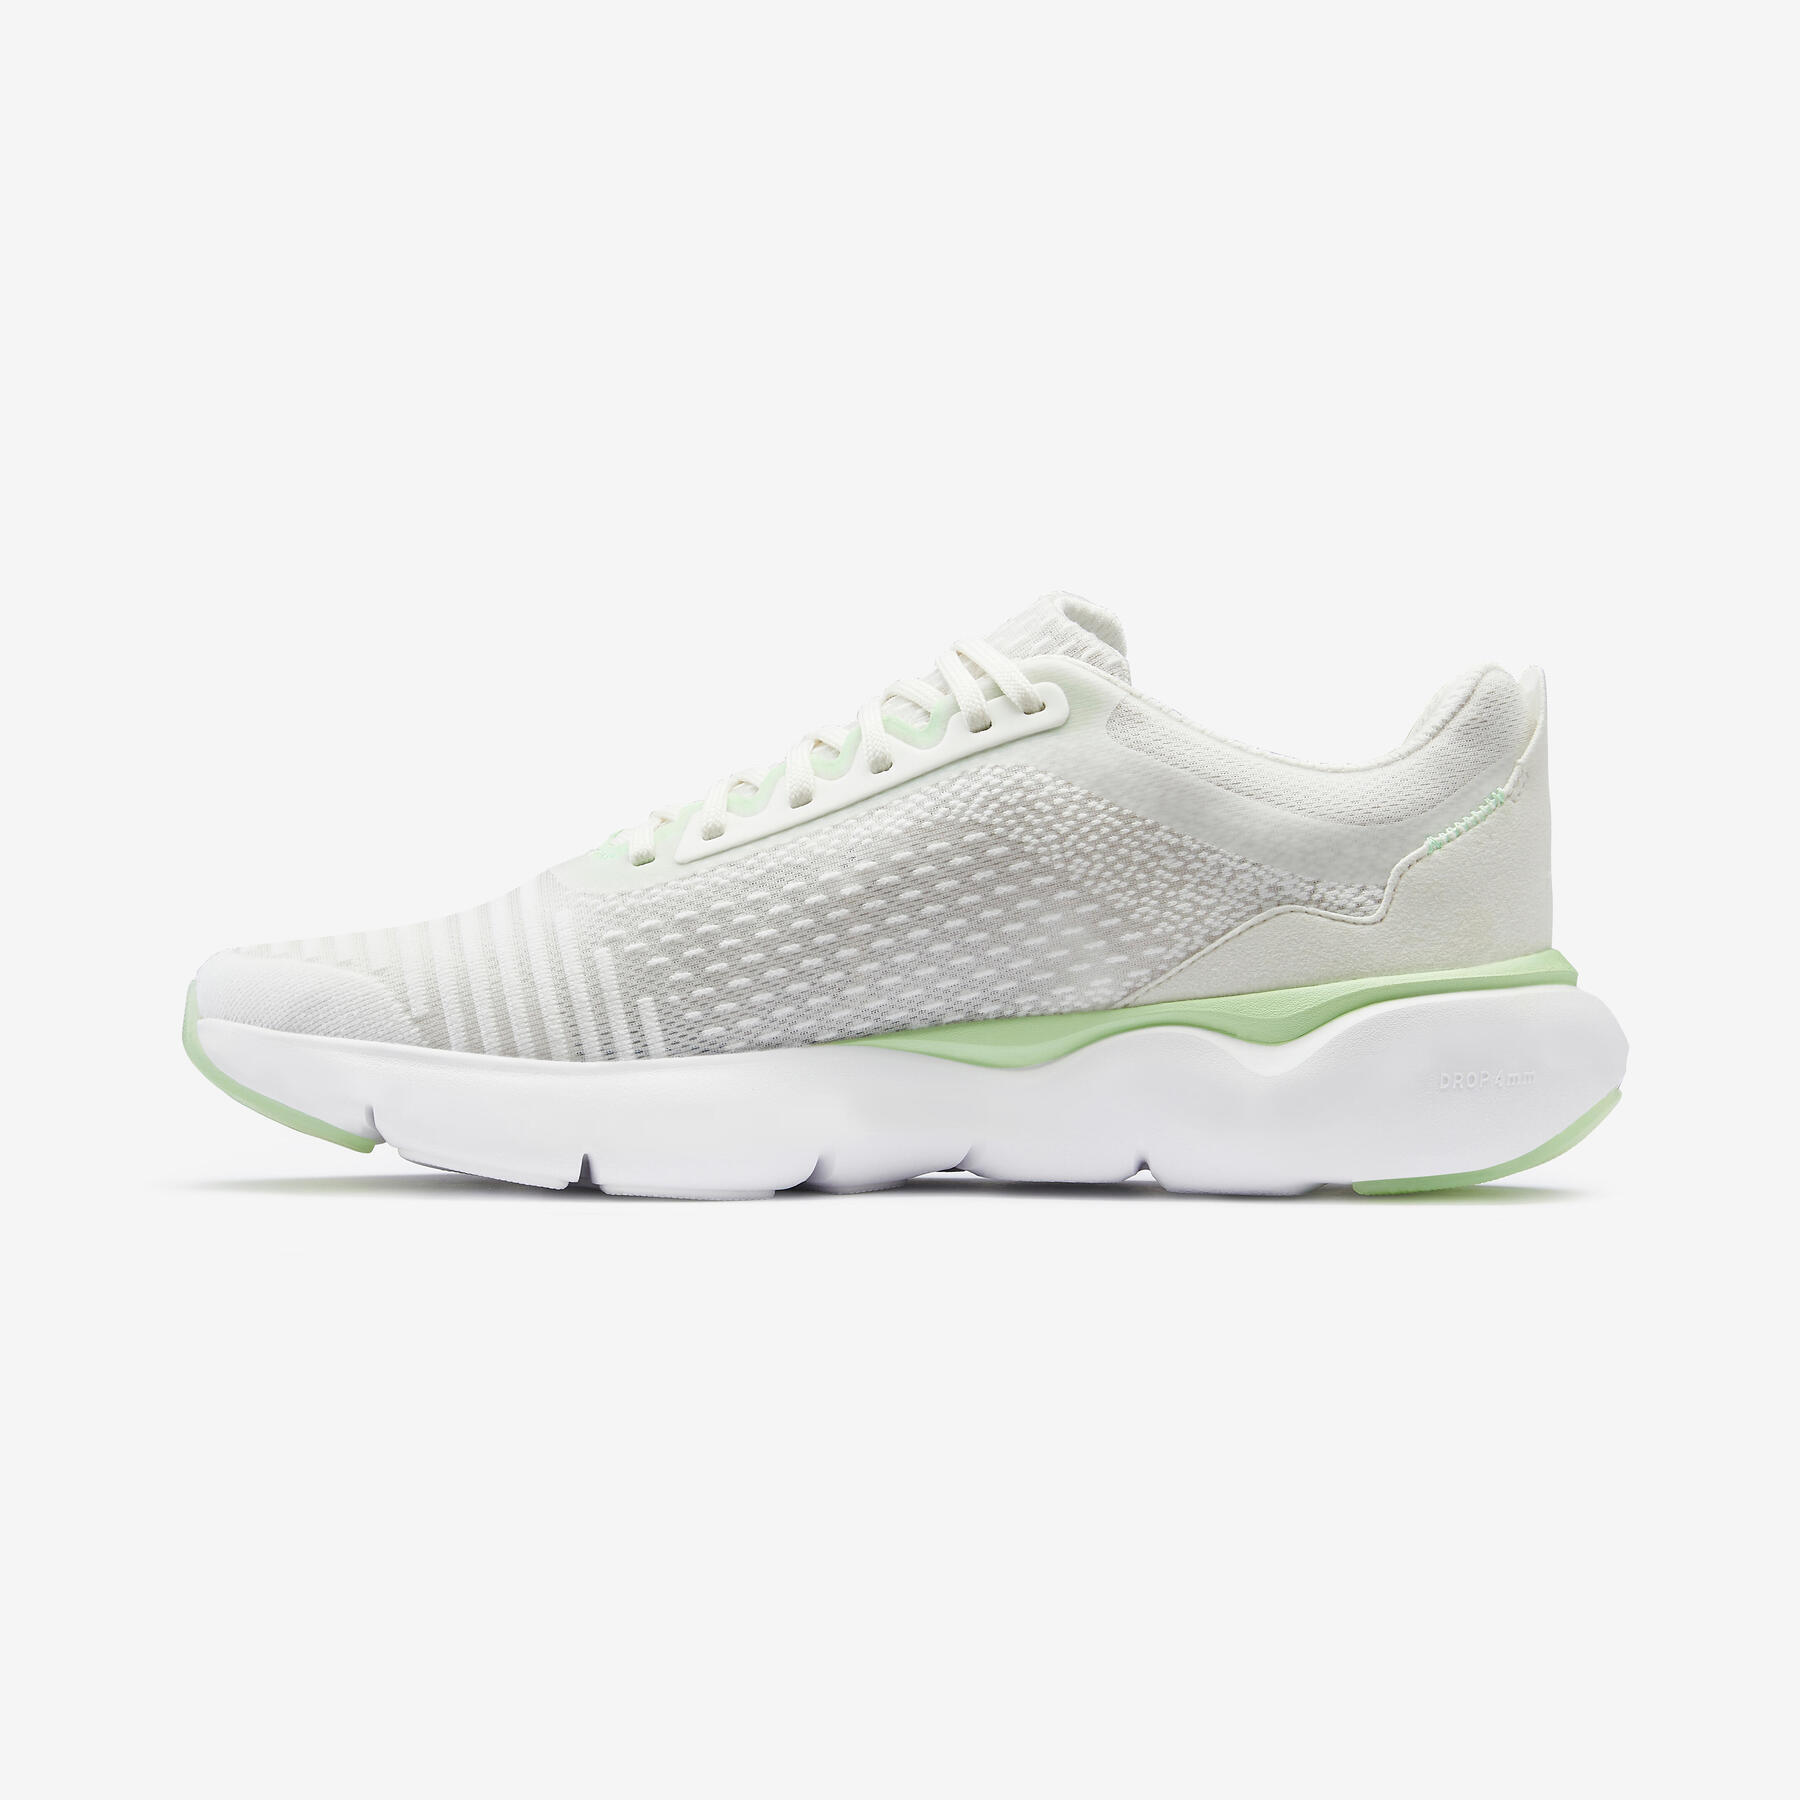 Refurbished Mens running shoes - Light Green and Off-White - A Grade 4/7